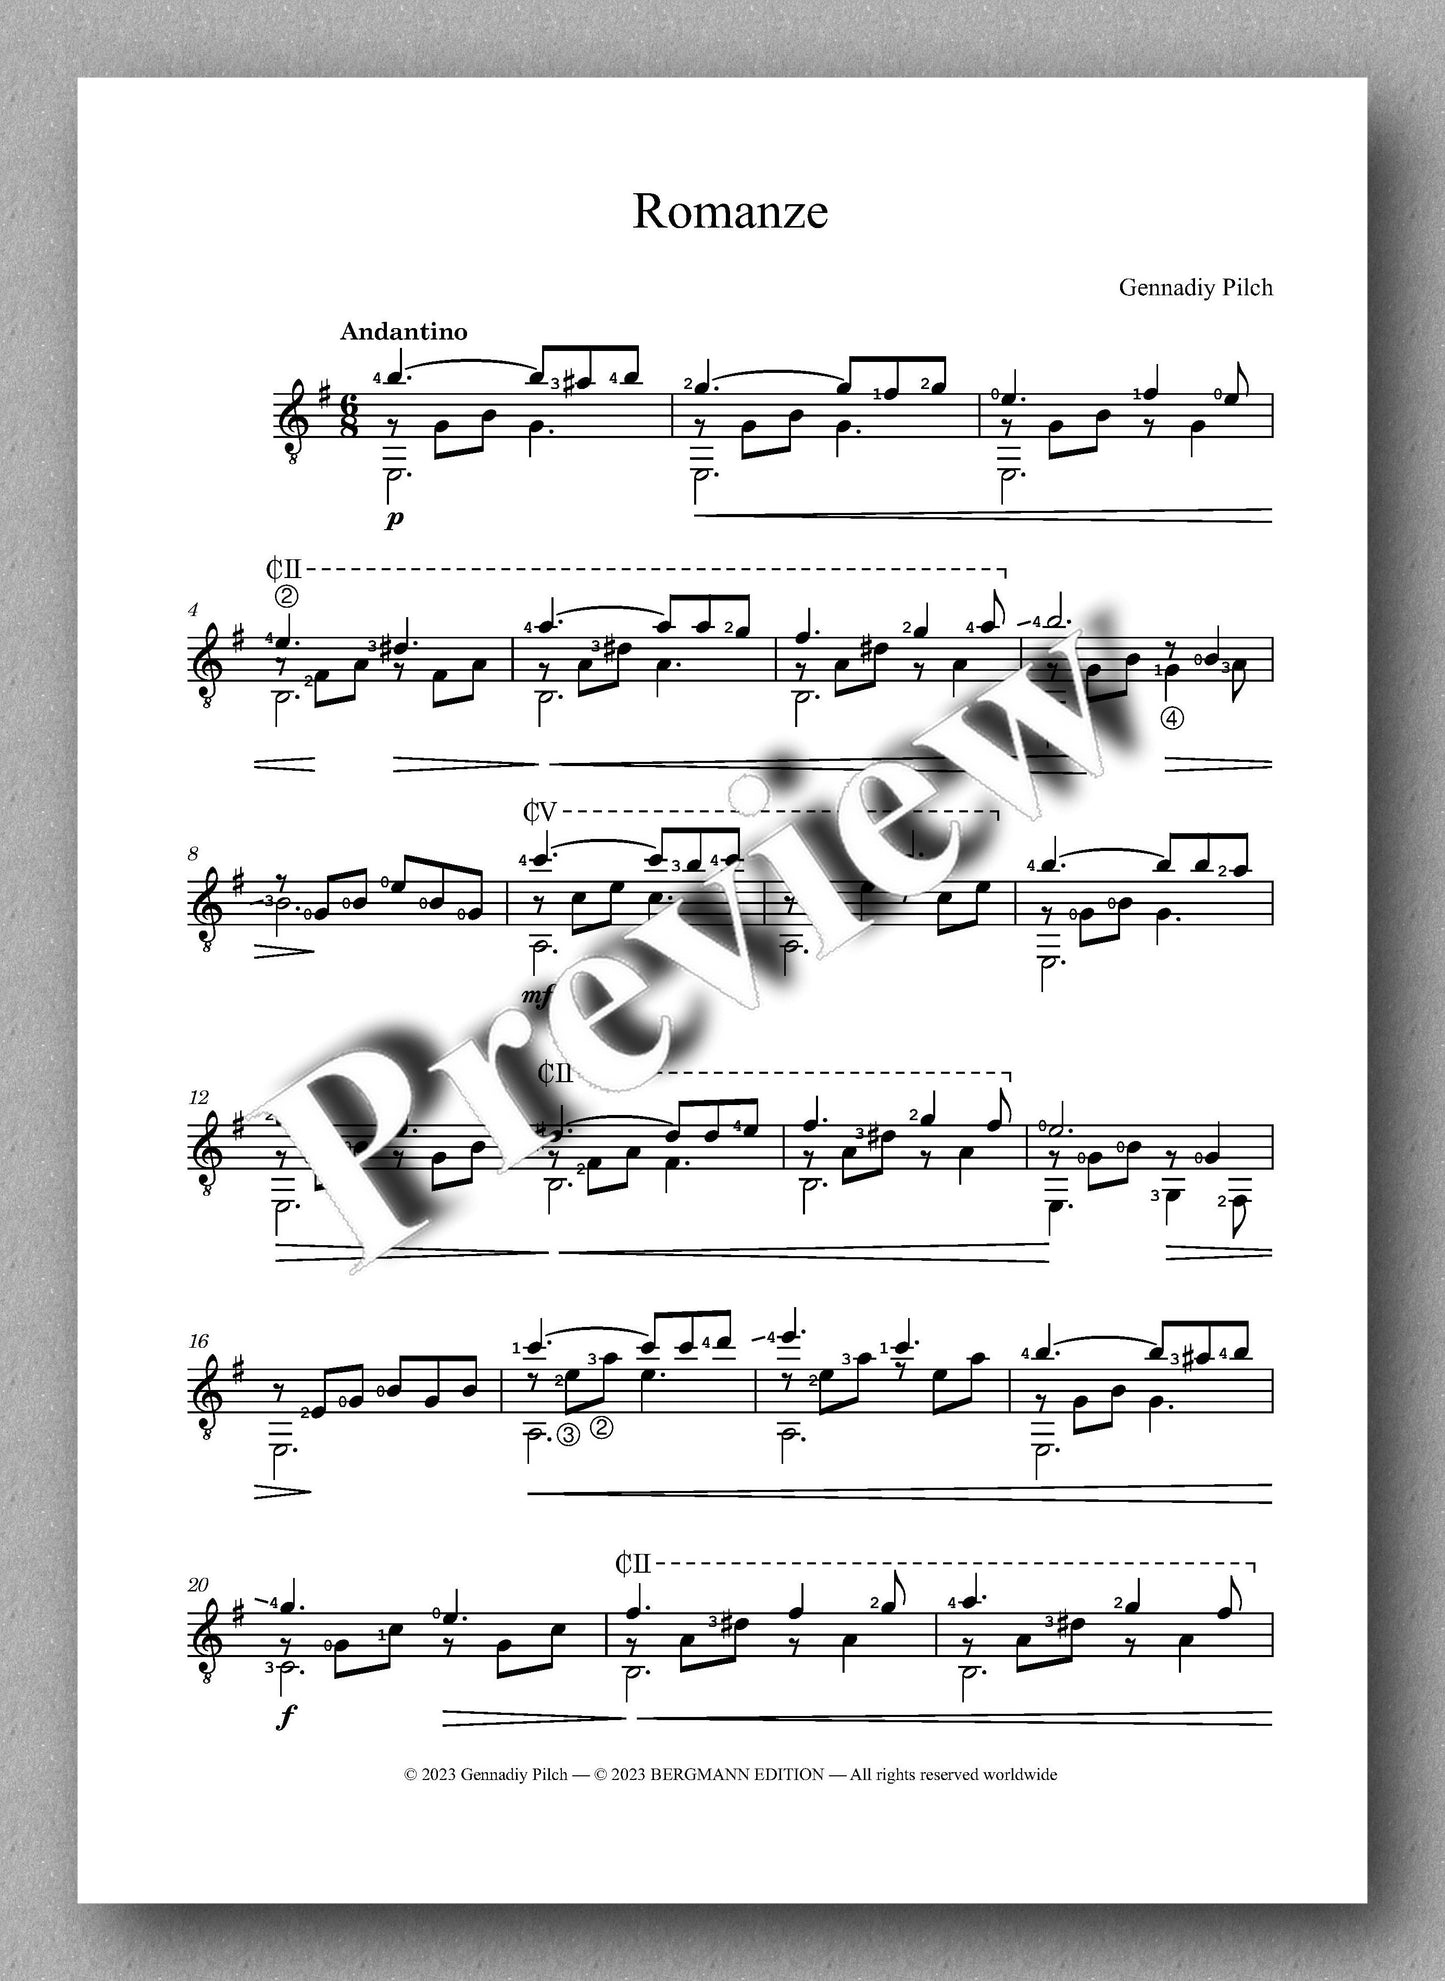 Gennadiy Pilch, Romanze - preview of the music score